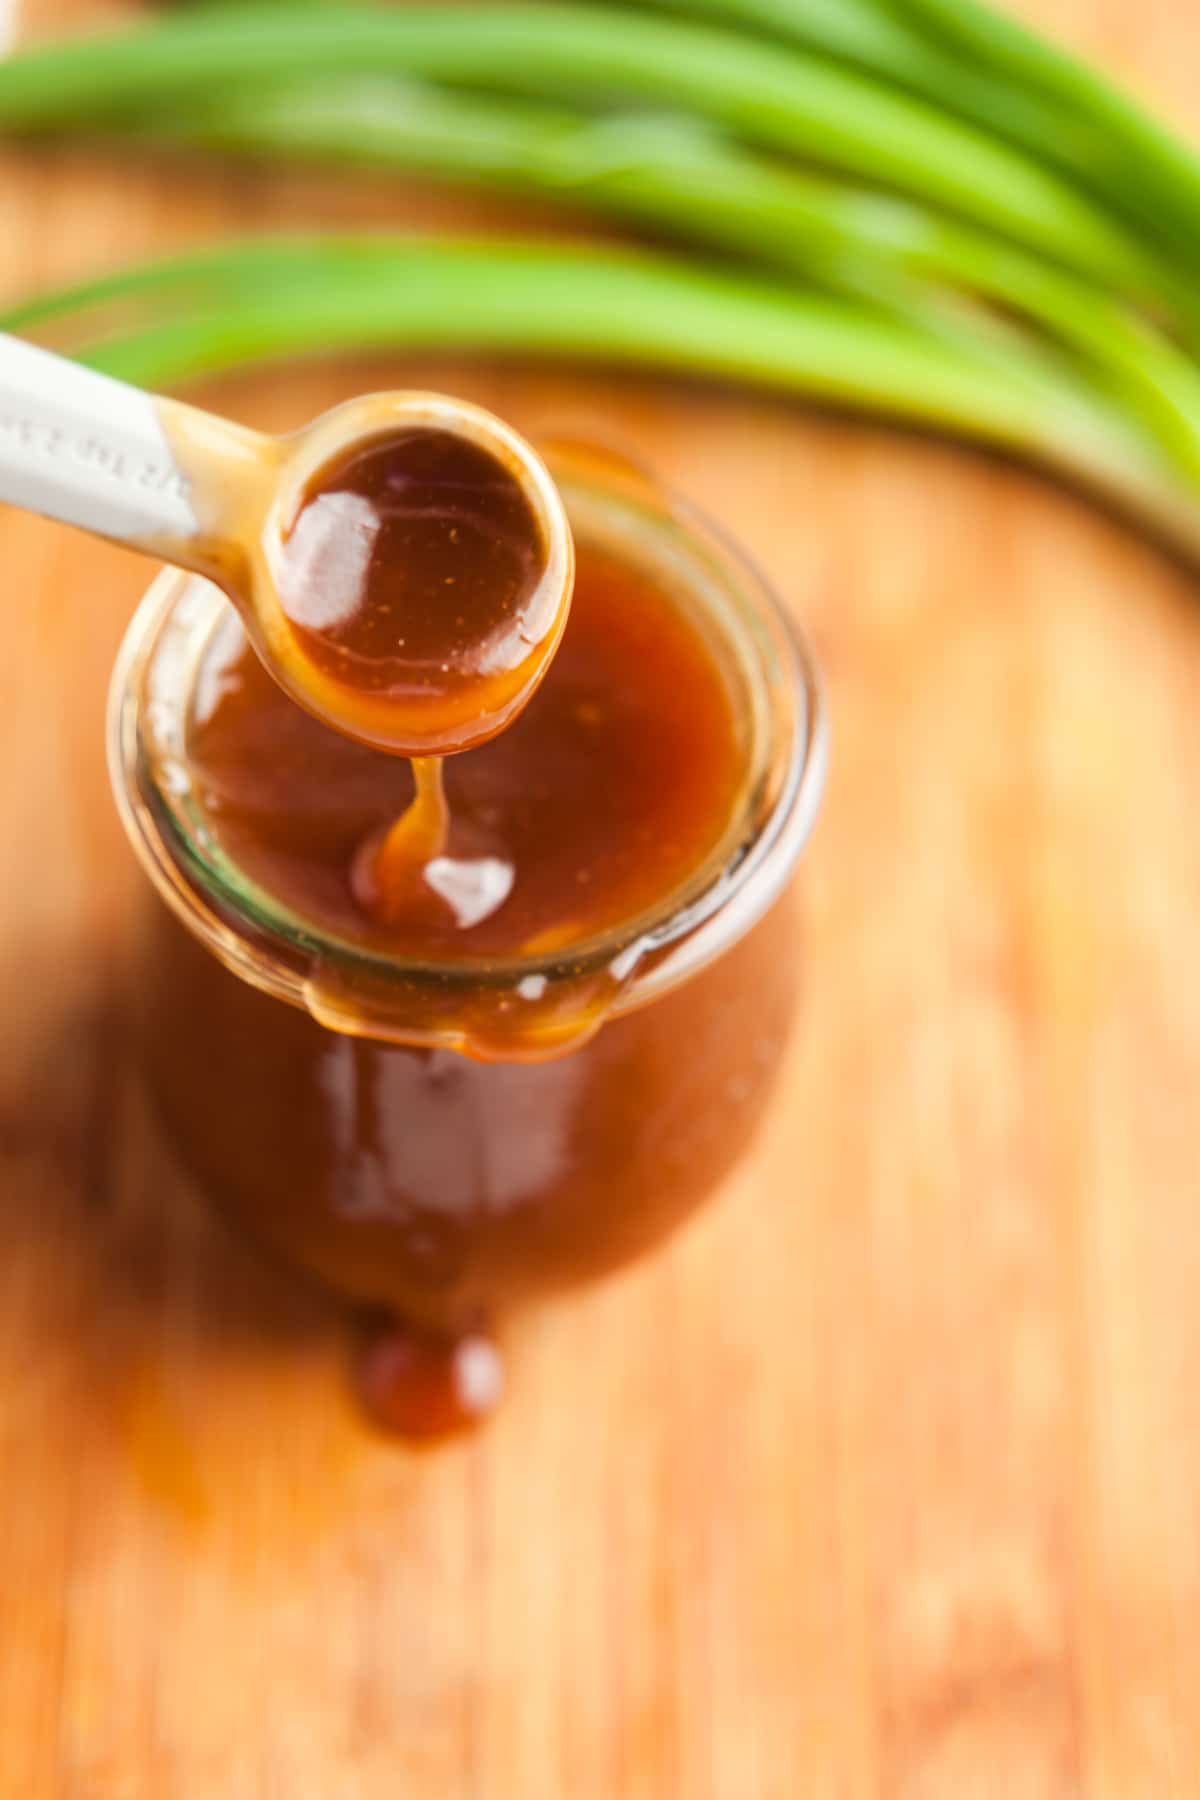 3/4 view of teriyaki sauce dripping off a spoon to show its thick, glossy texture.